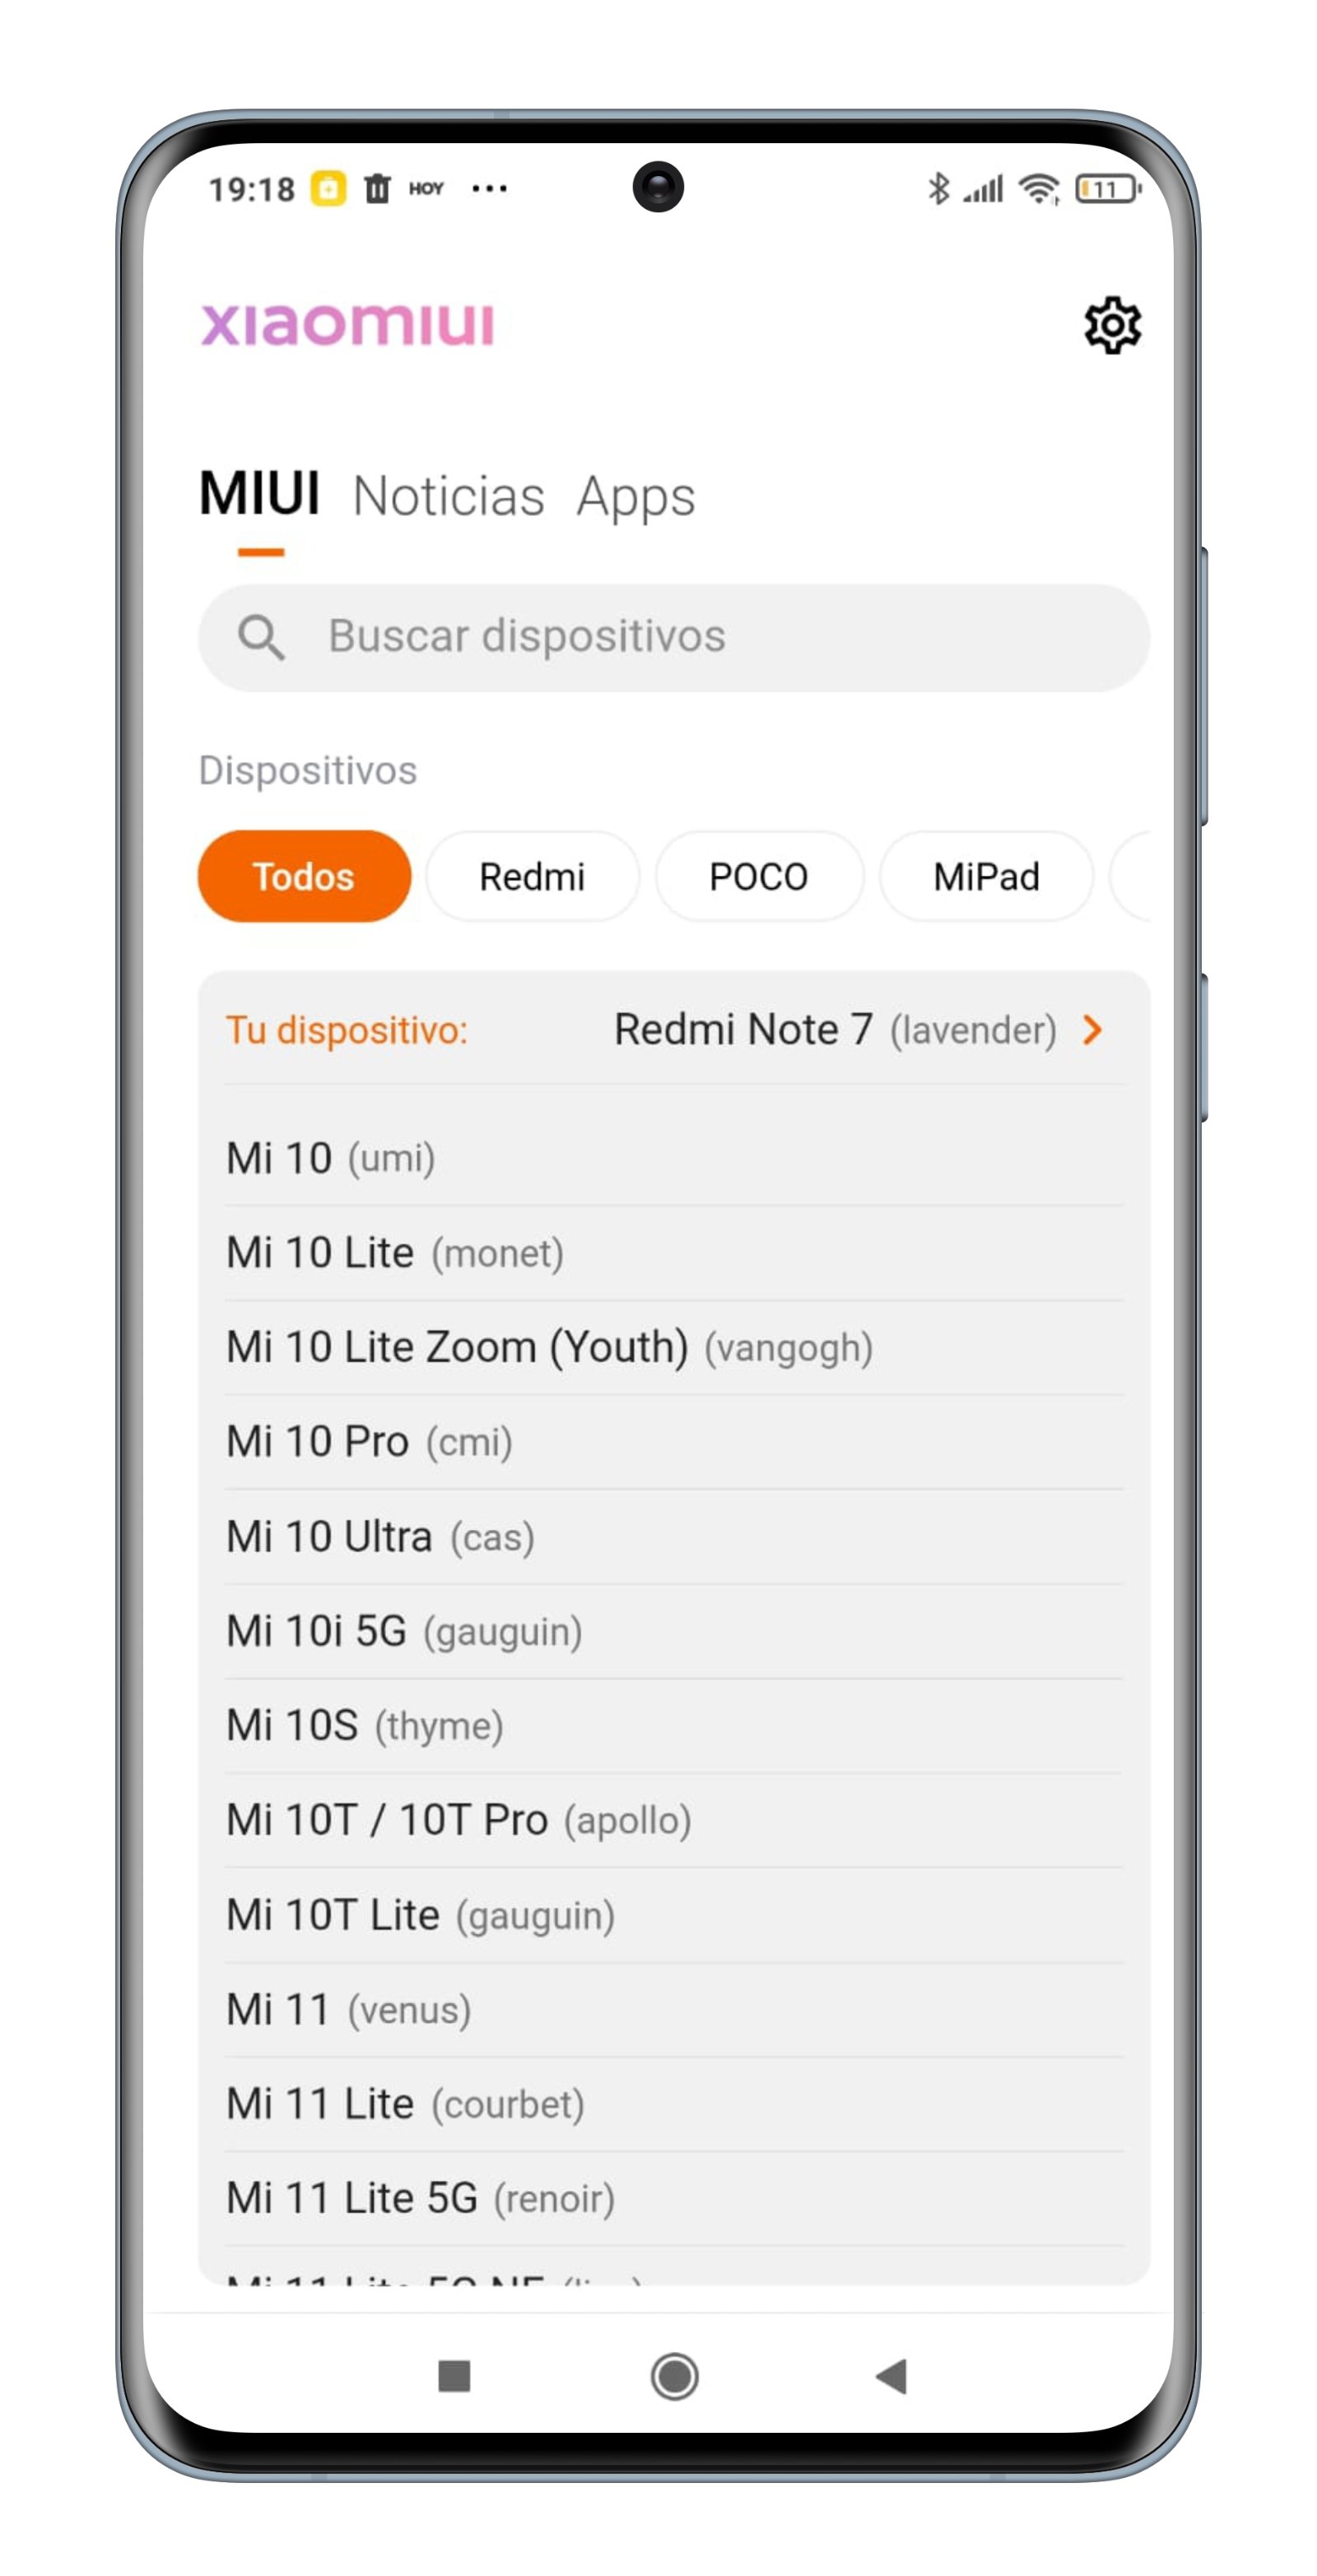 So you can see if your Xiaomi phone will receive Android 12 and MIUI 13